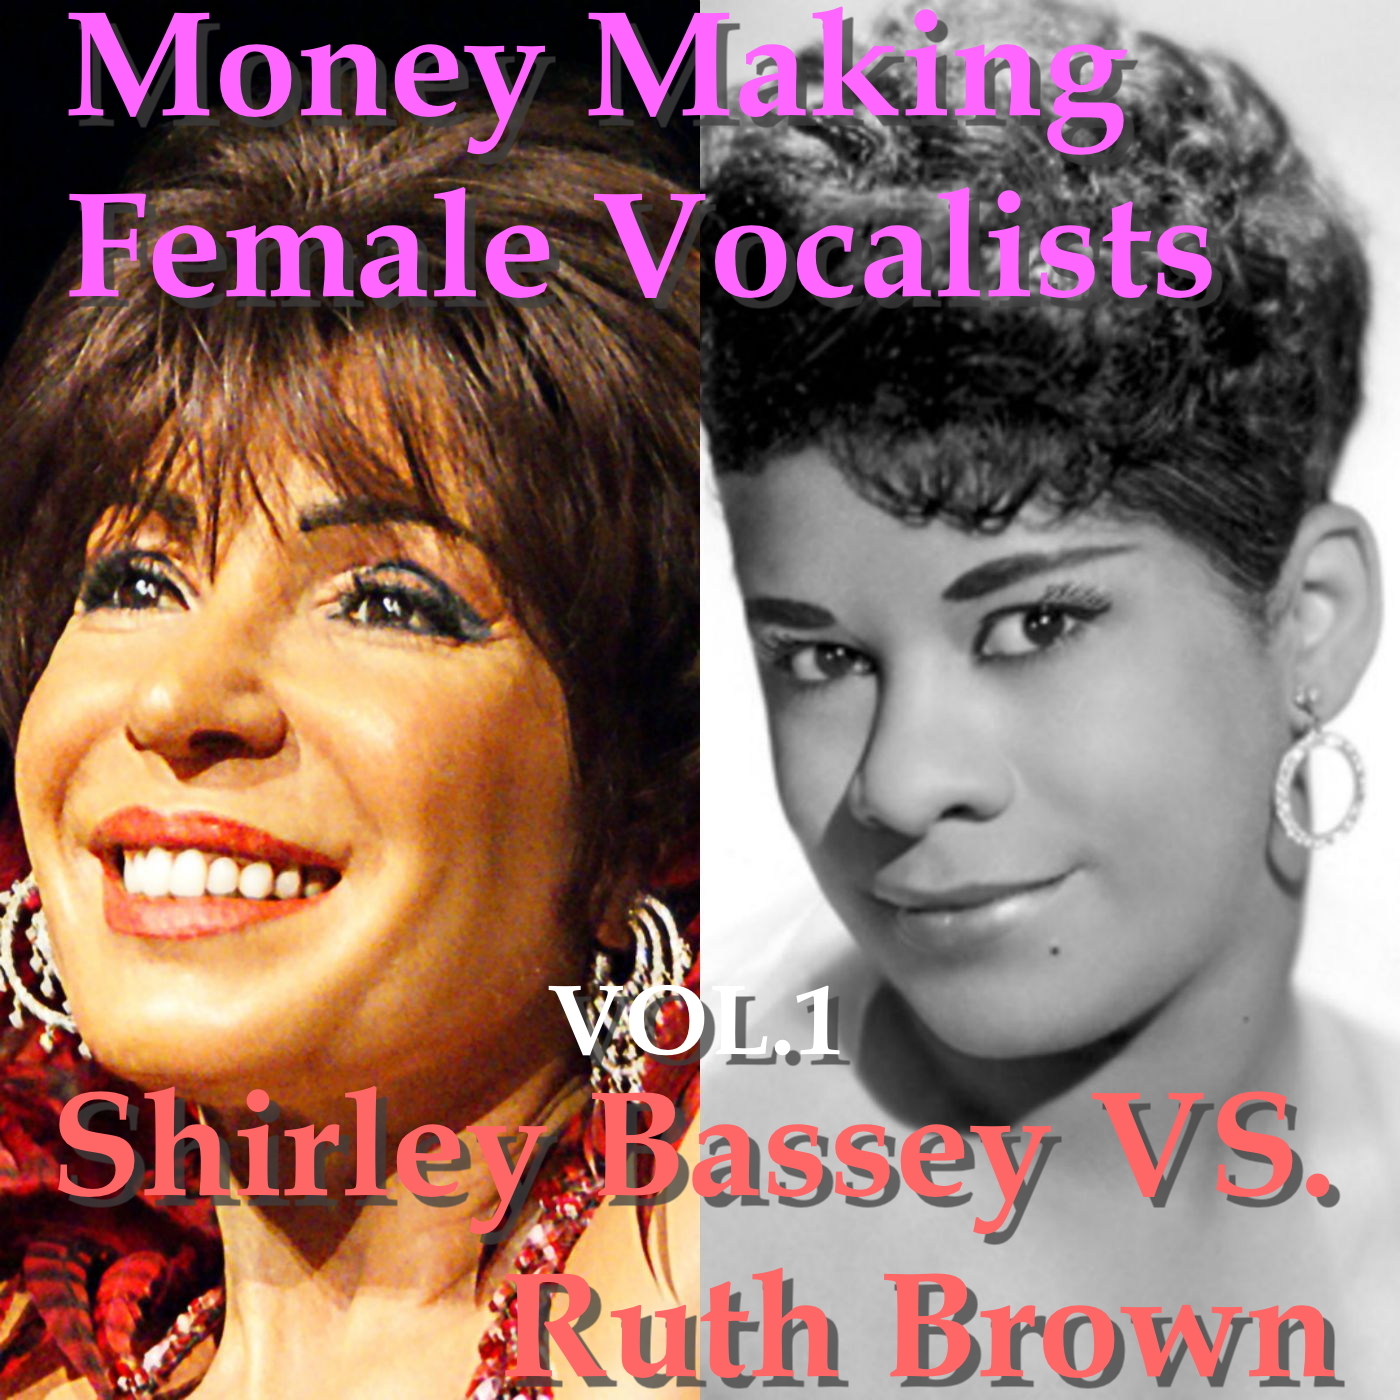 Money Making Female Vocalists: Shirley Bassey VS. Ruth Brown, Vol.1